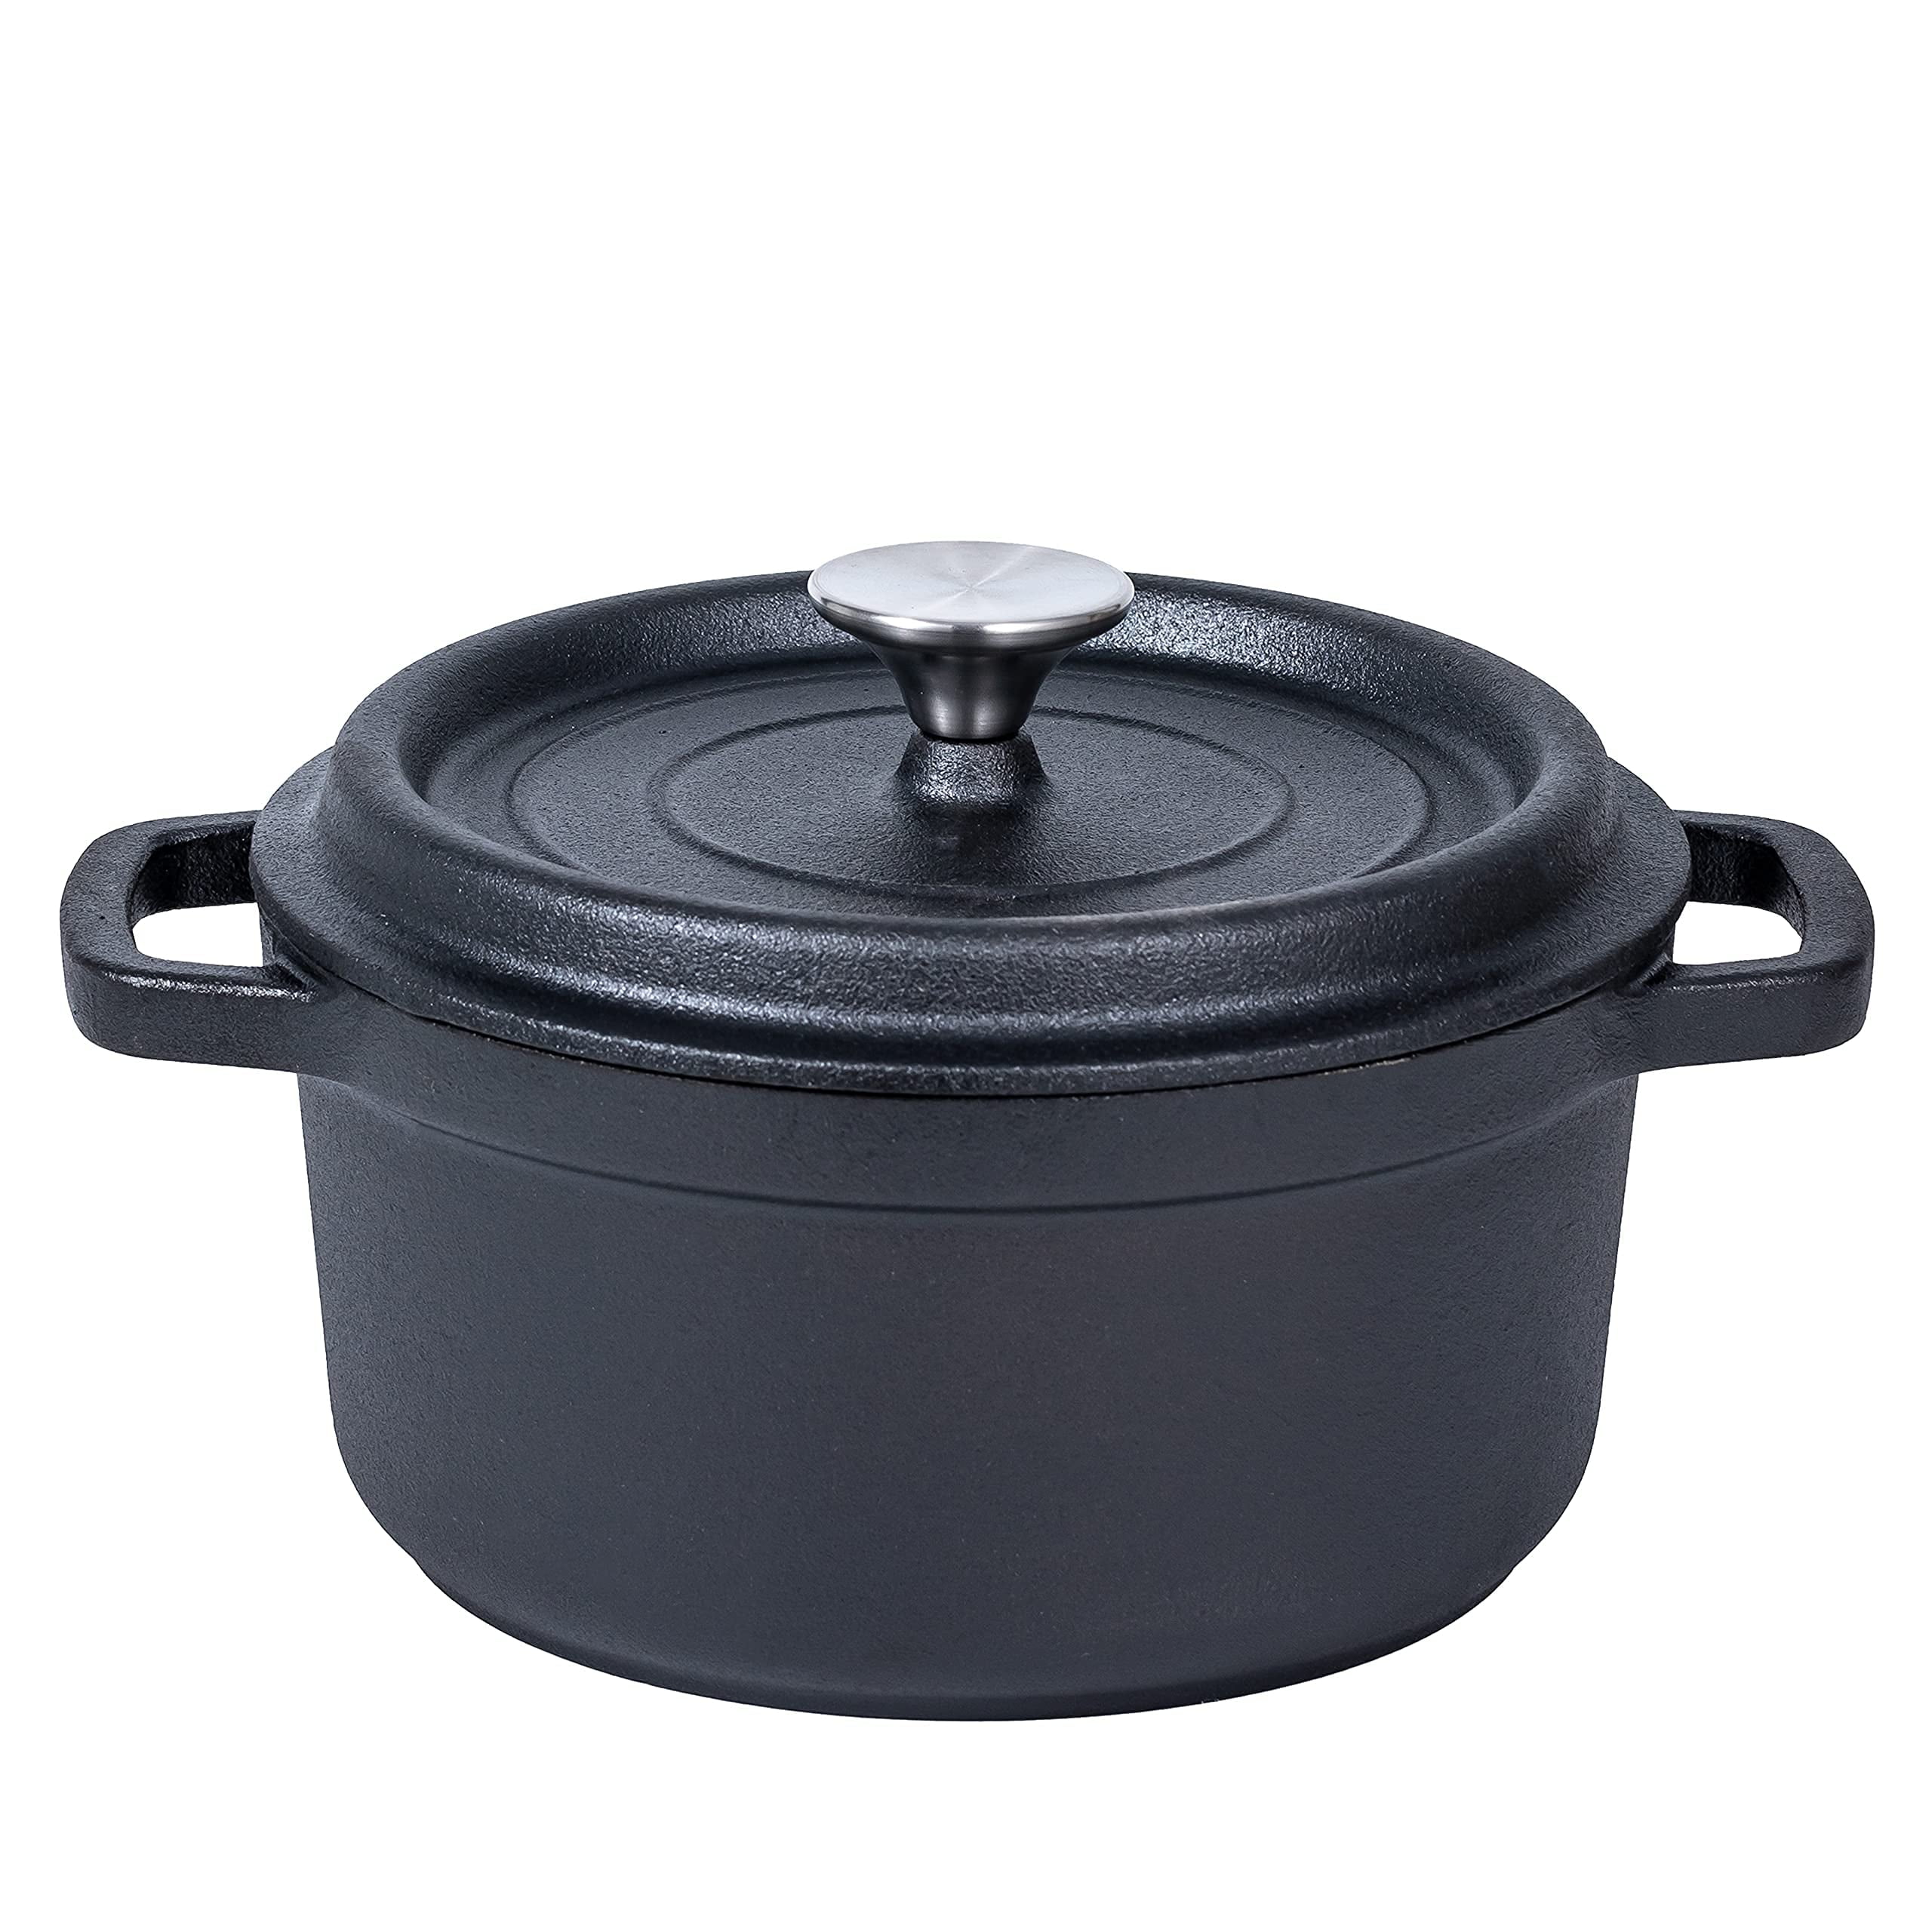 Bruntmor 2.3 Qt Pre-seasoned Cast Iron Dutch Oven with Silicone Accessories  and Lid - Ideal for Braising, Casseroles and More!